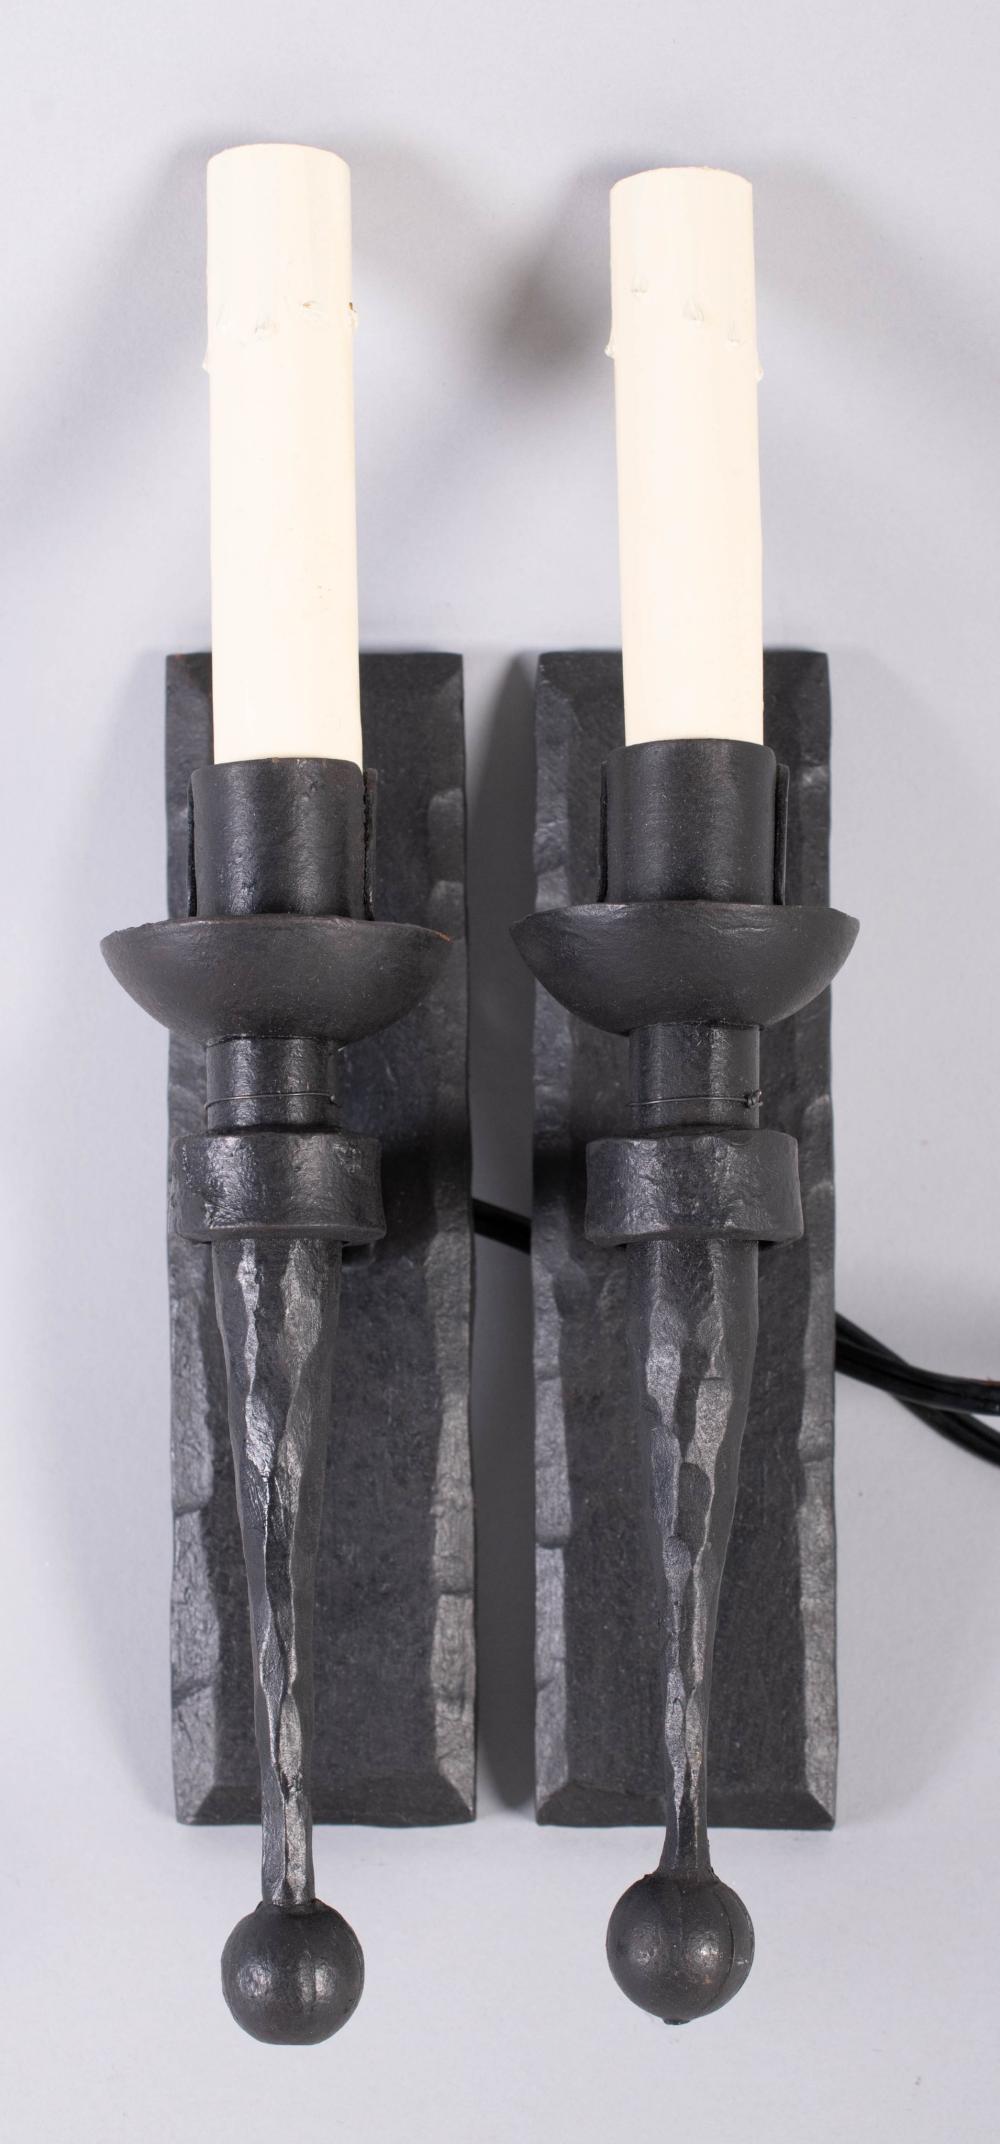 PAIR OF MEDIEVAL STYLE SCONCES